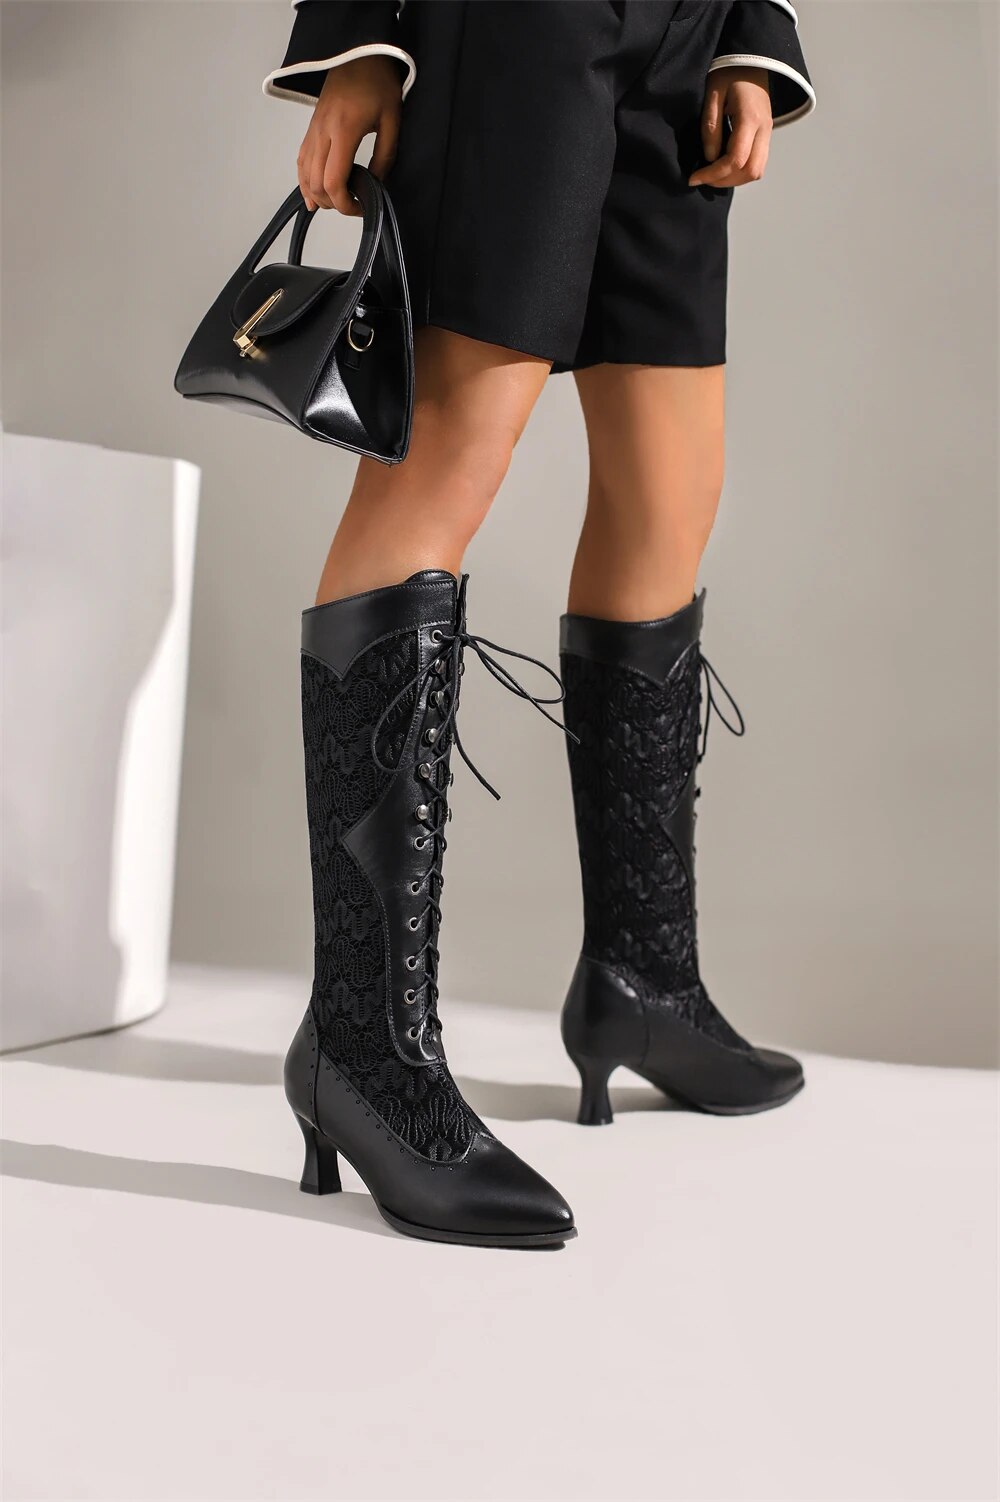 come4buy.com-Mid-Calf Boots Pointed Toe For Women